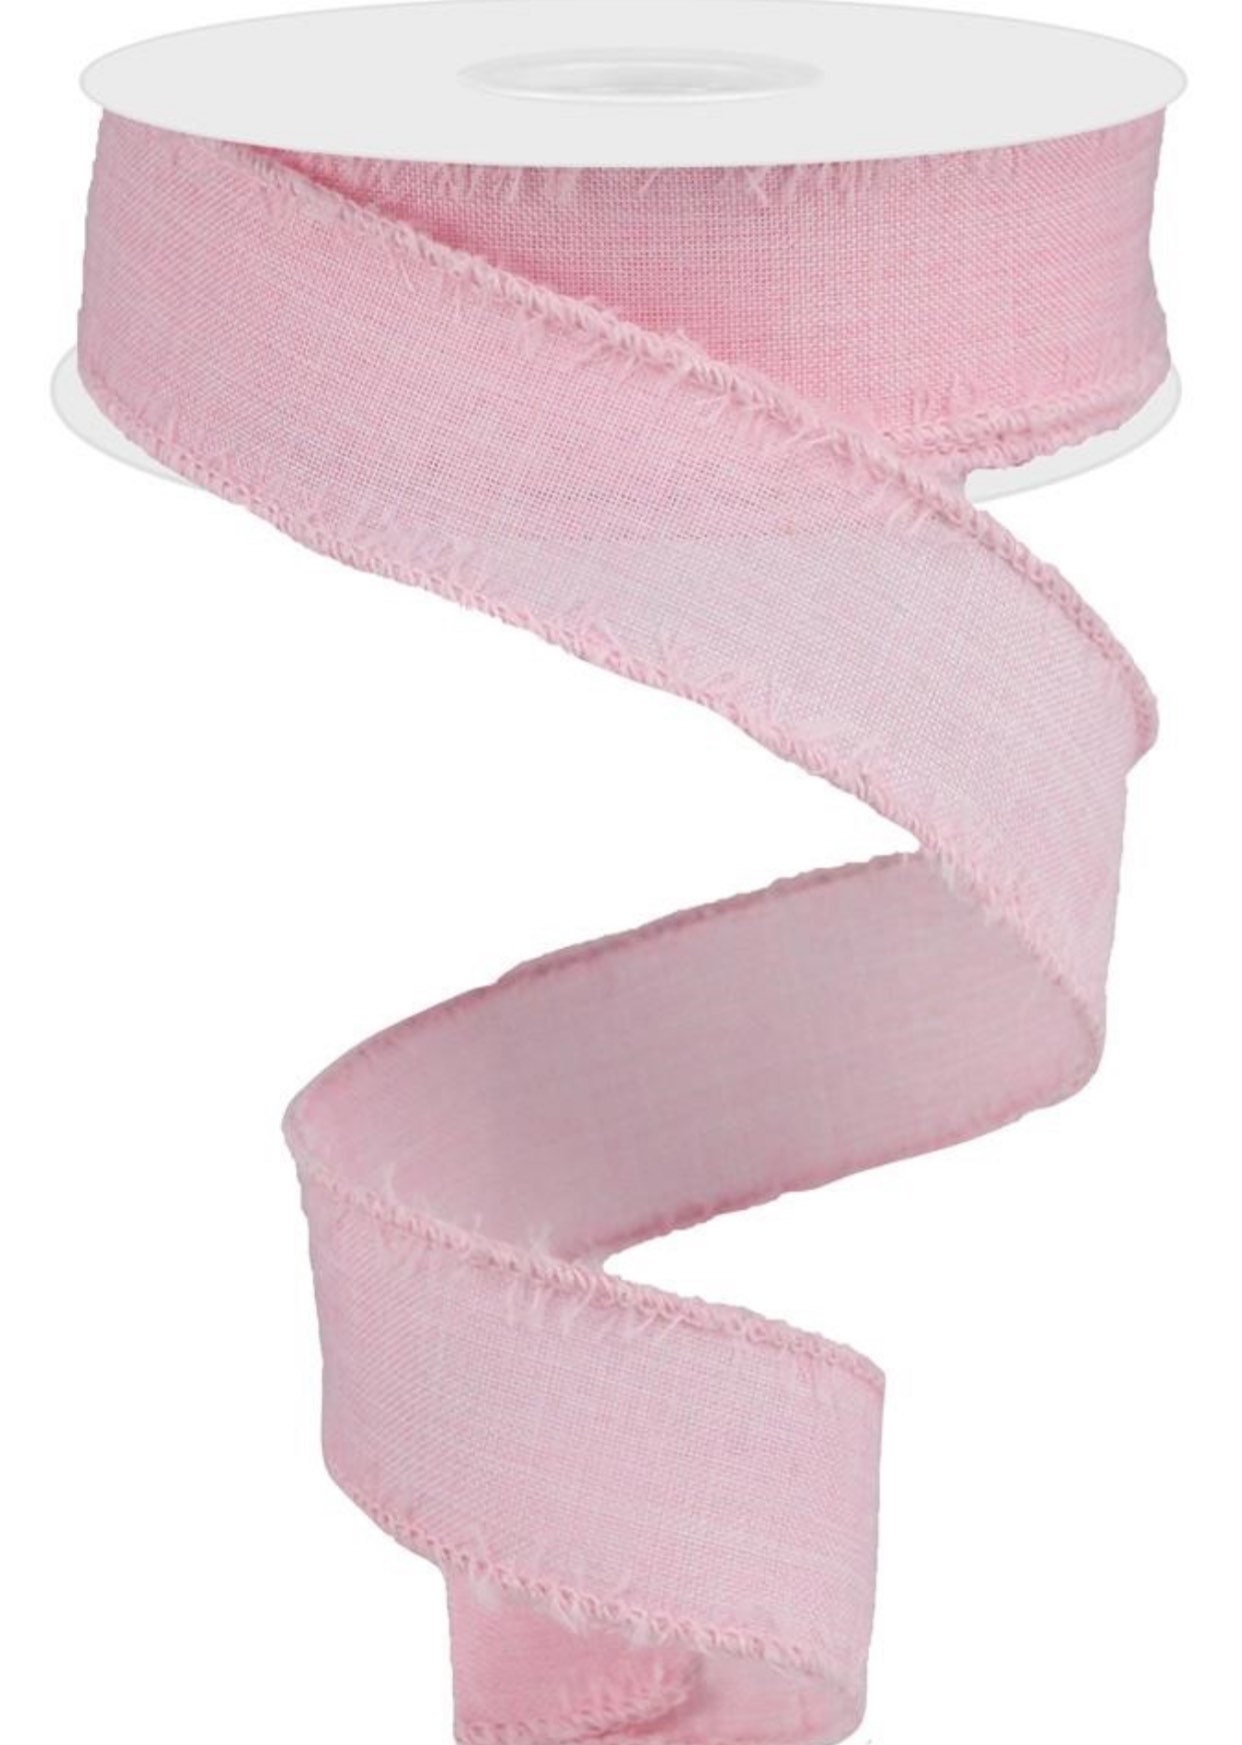 1.5” x 10 yard wired pink and white striped checked ribbon roll, pink and  white check ribbon, RG0179915